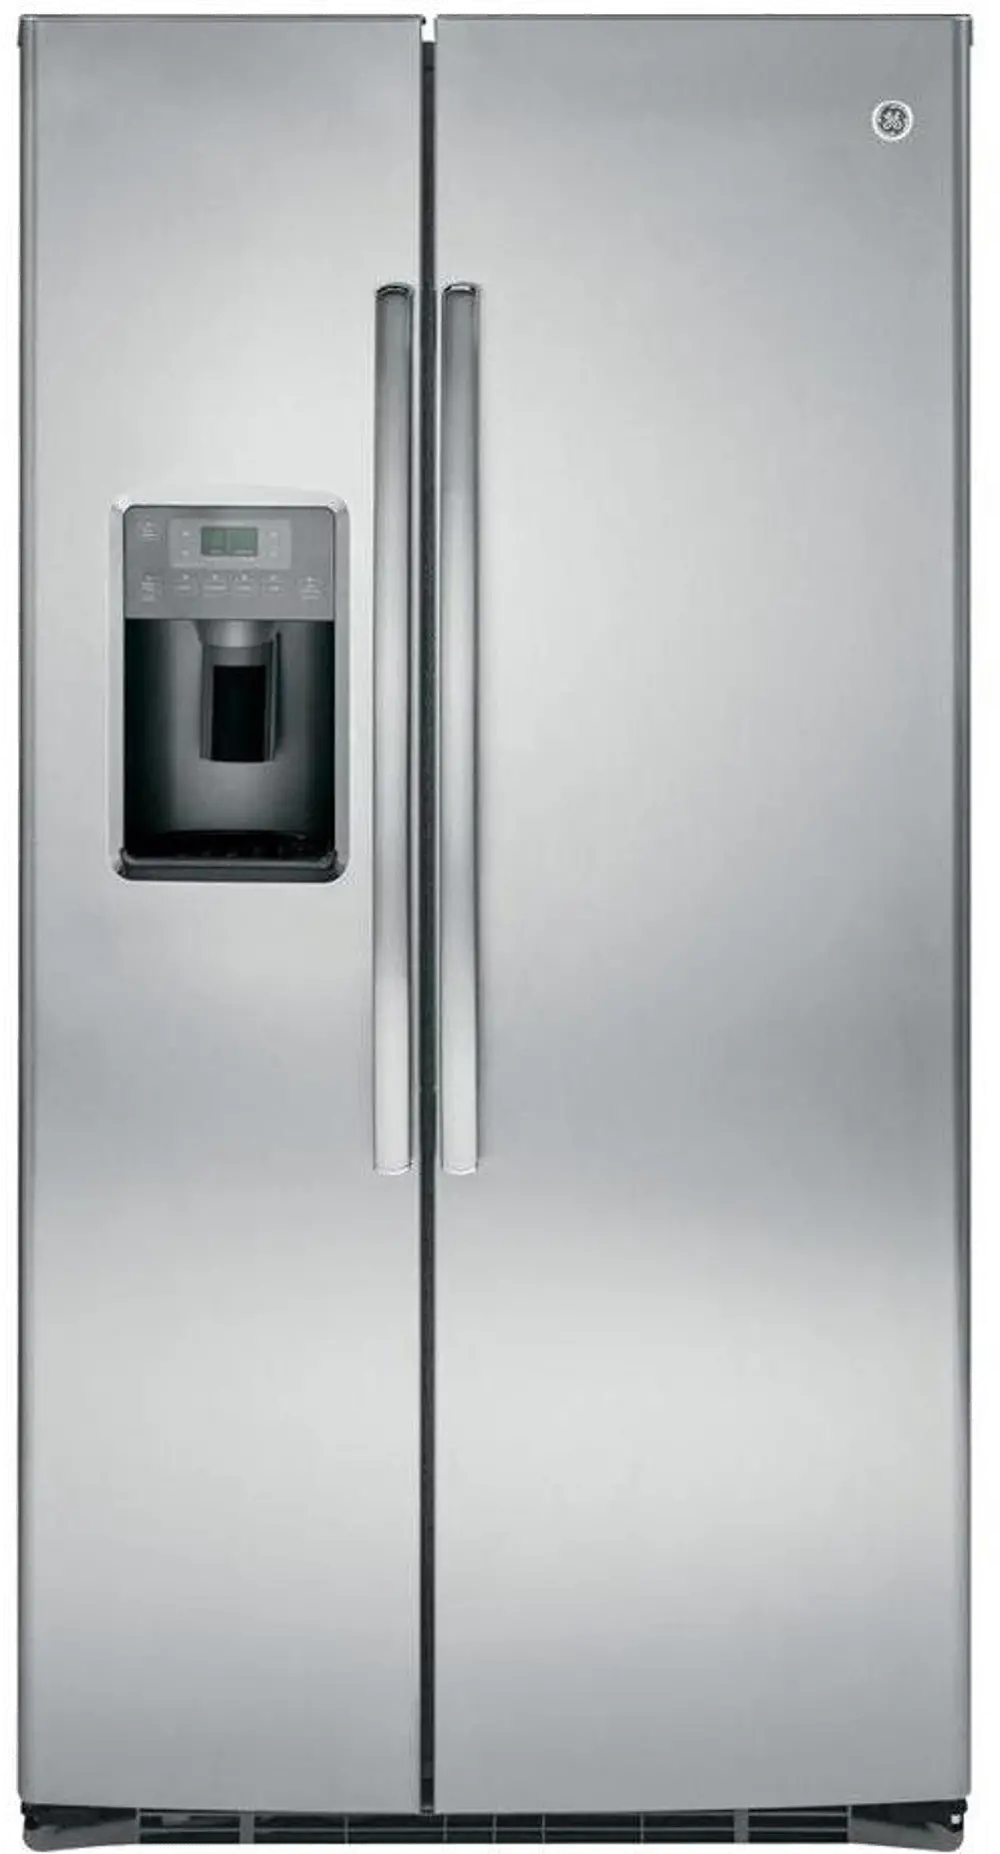 GSE25HSHSS GE ENERGY STAR 25.3 Cu. Ft. Side-By-Side Refrigerator - Stainless Steel-1